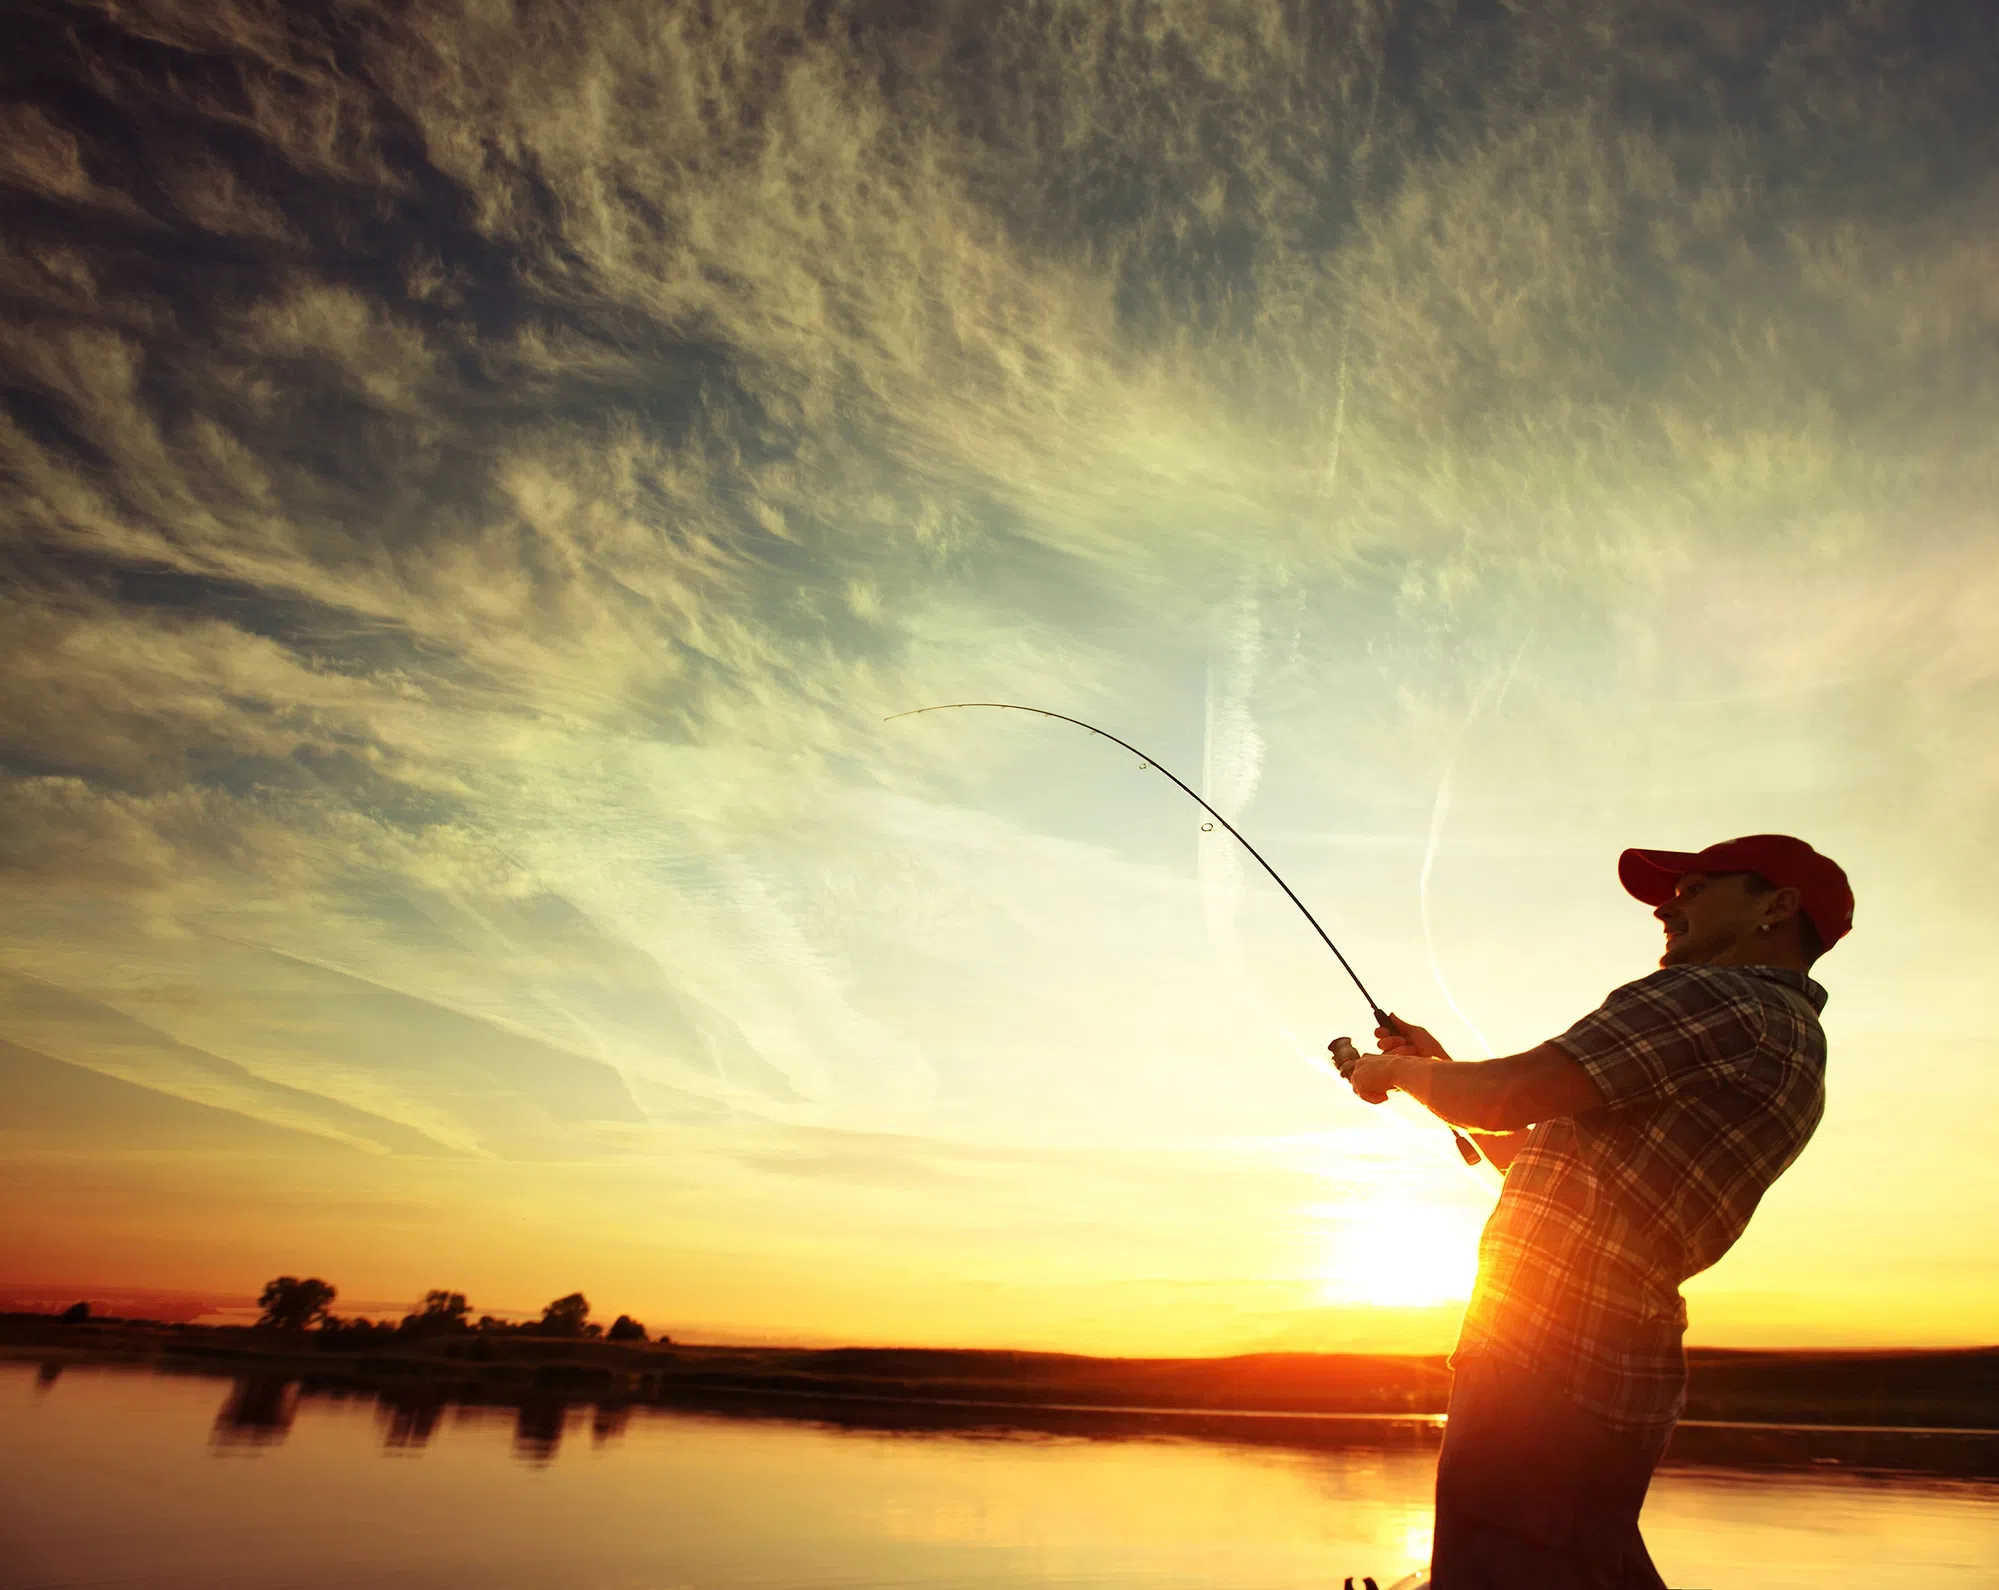 Ontario Offering Free Fishing On Mother's Day Weekend